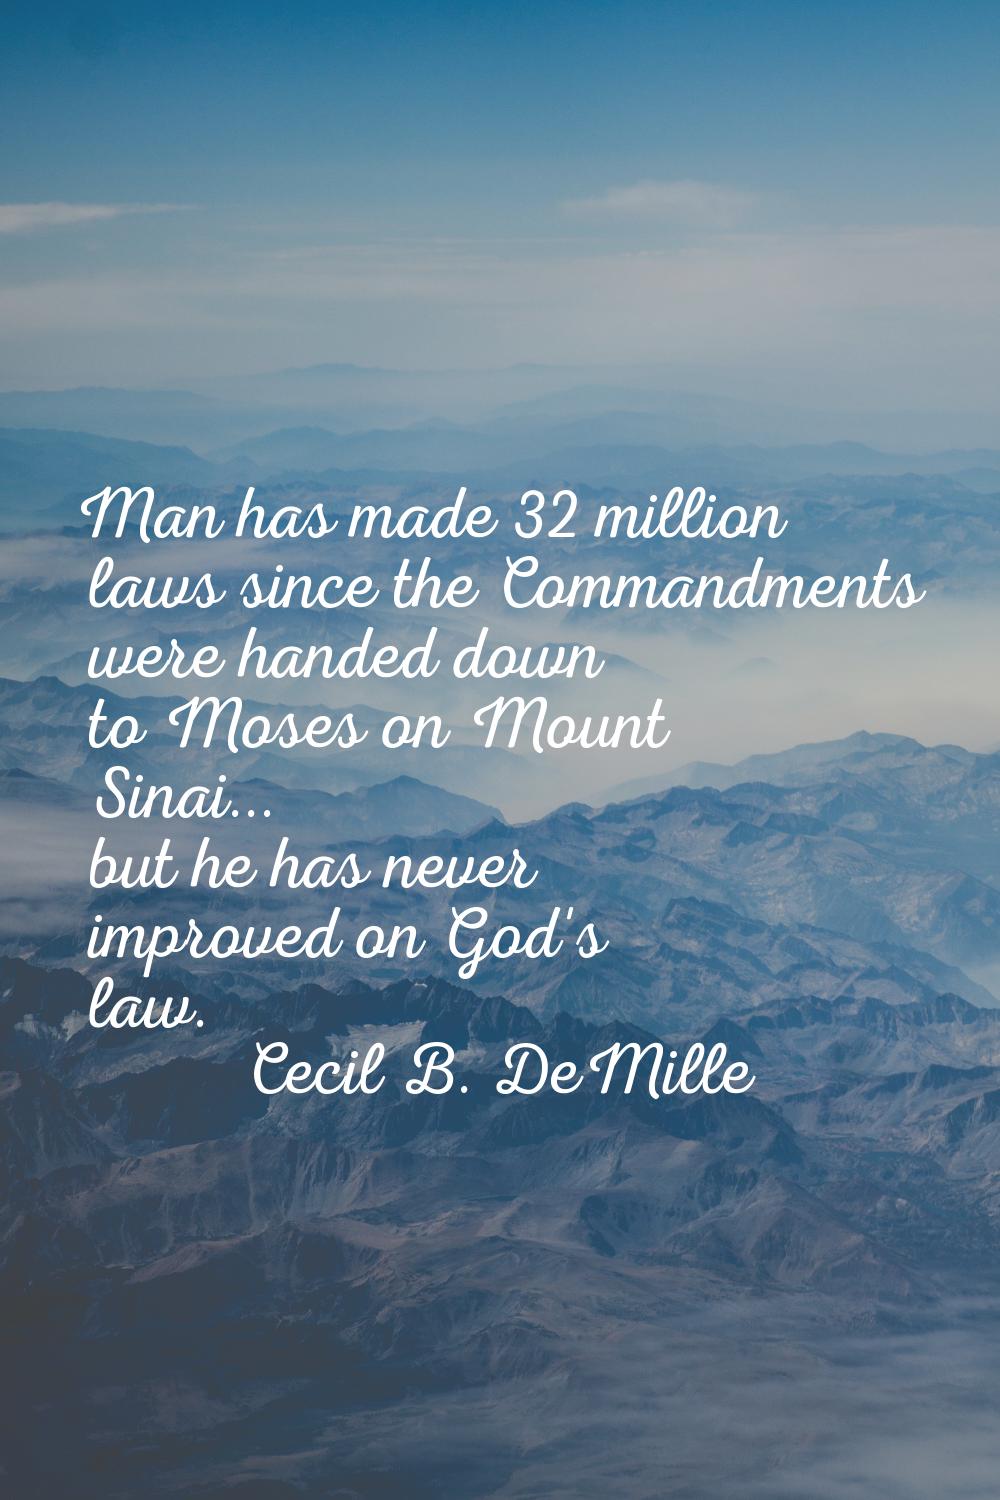 Man has made 32 million laws since the Commandments were handed down to Moses on Mount Sinai... but